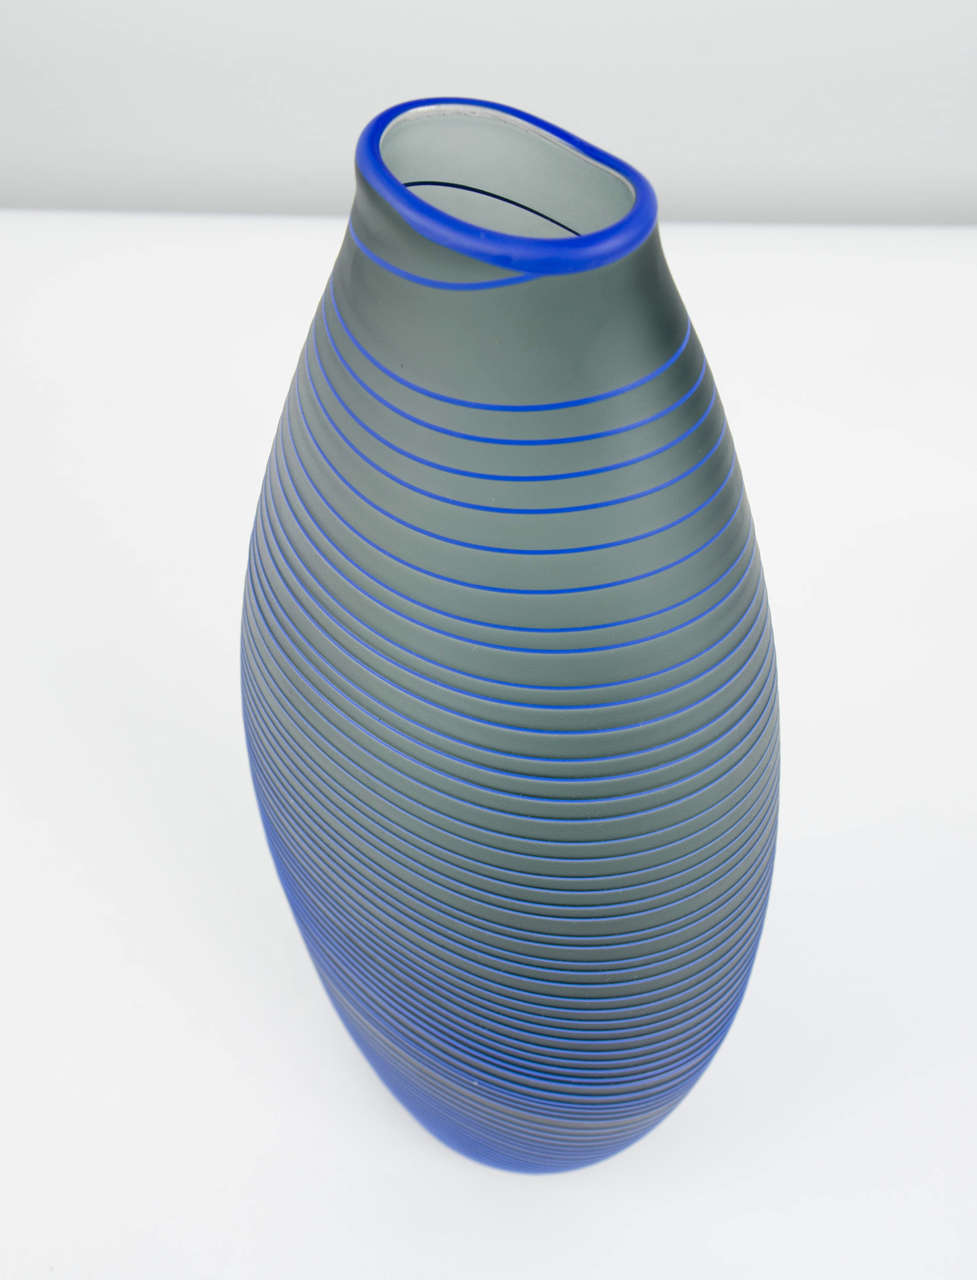 Tonal Frequency Vase in Grey is a unique handblown glass vessel with fine raised cane detail created by the British artist Liam Reeves. Handblown in grey glass, the exterior surface has a blue glass trail that winds around the entire piece, ending